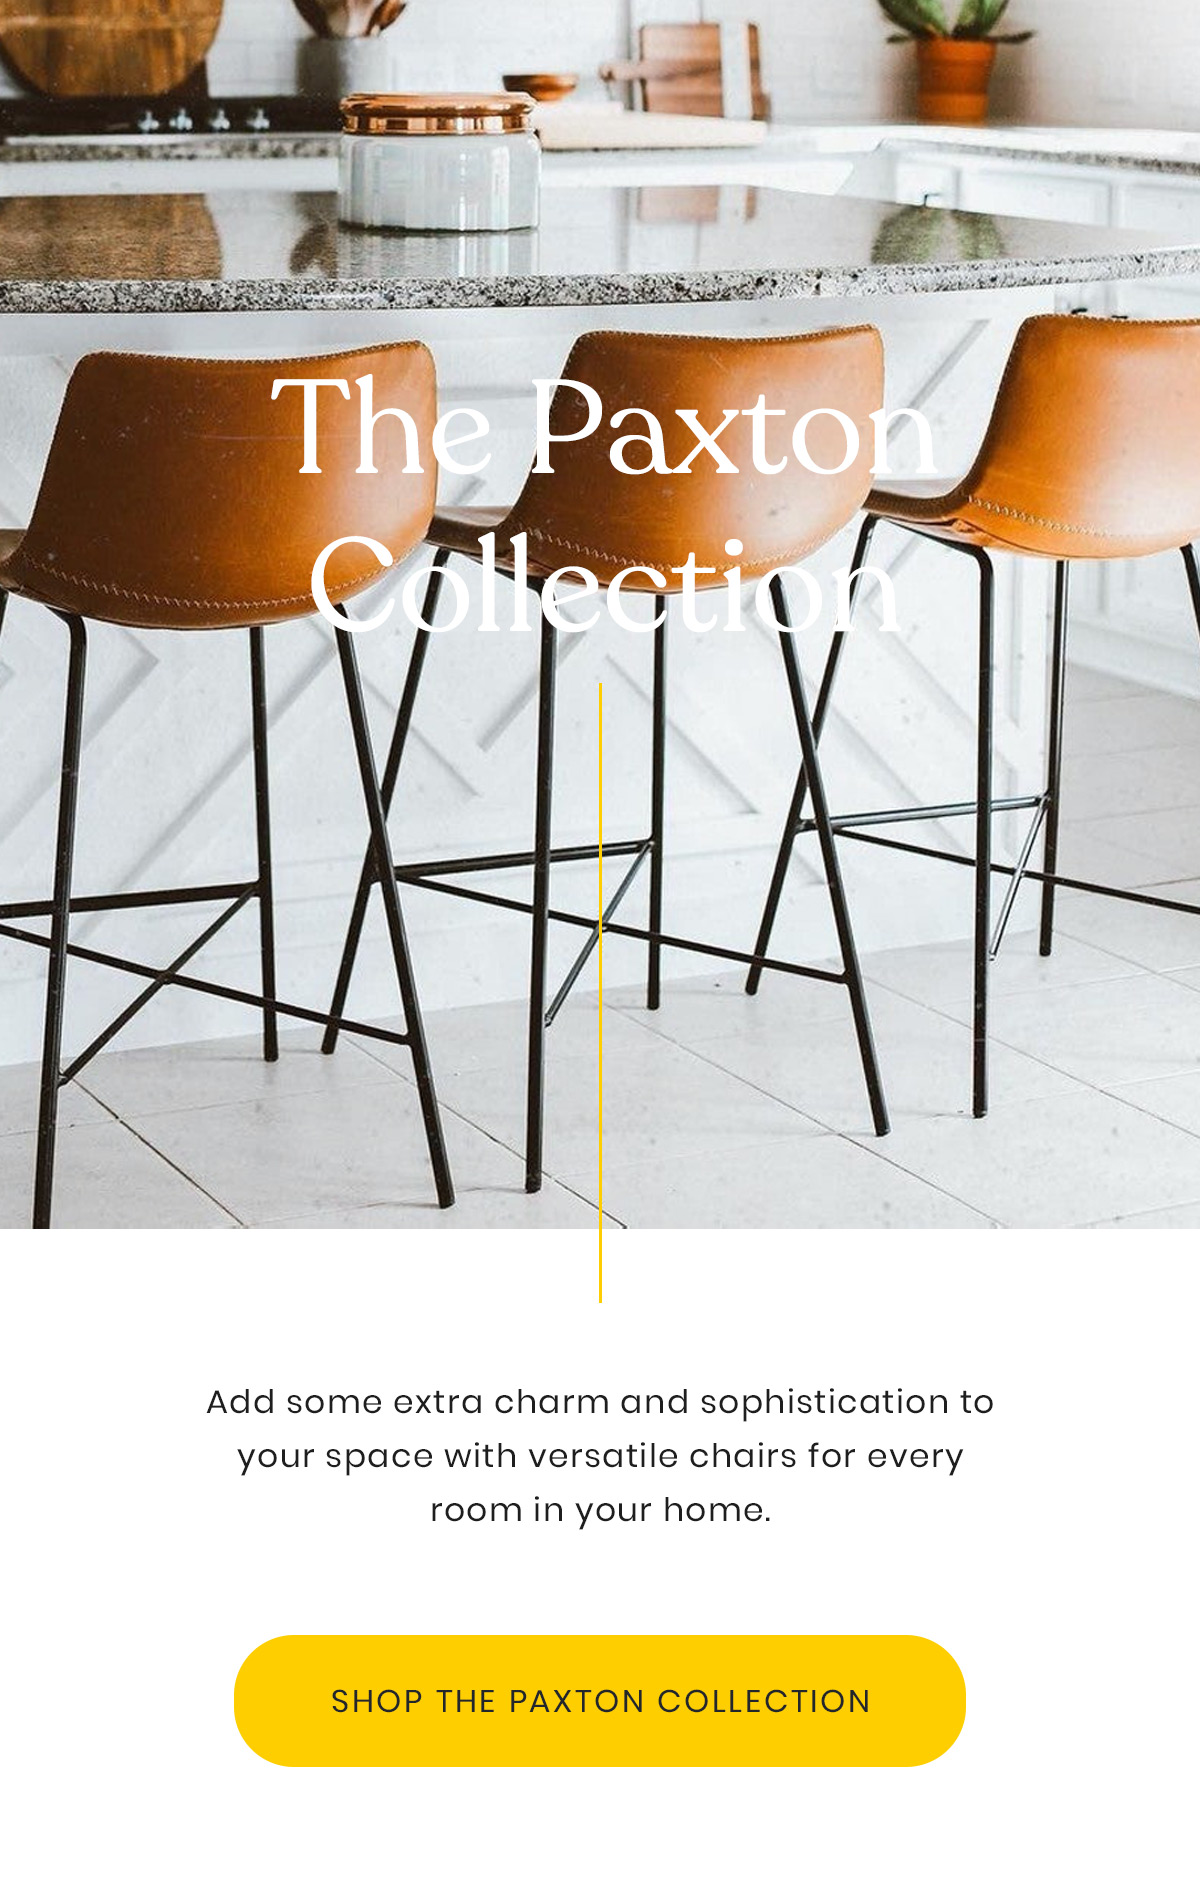 The Paxton Collection | Add some extra charm and sophistication to your space with versatile chairs for every room in your home. | Shop The Paxton Collection